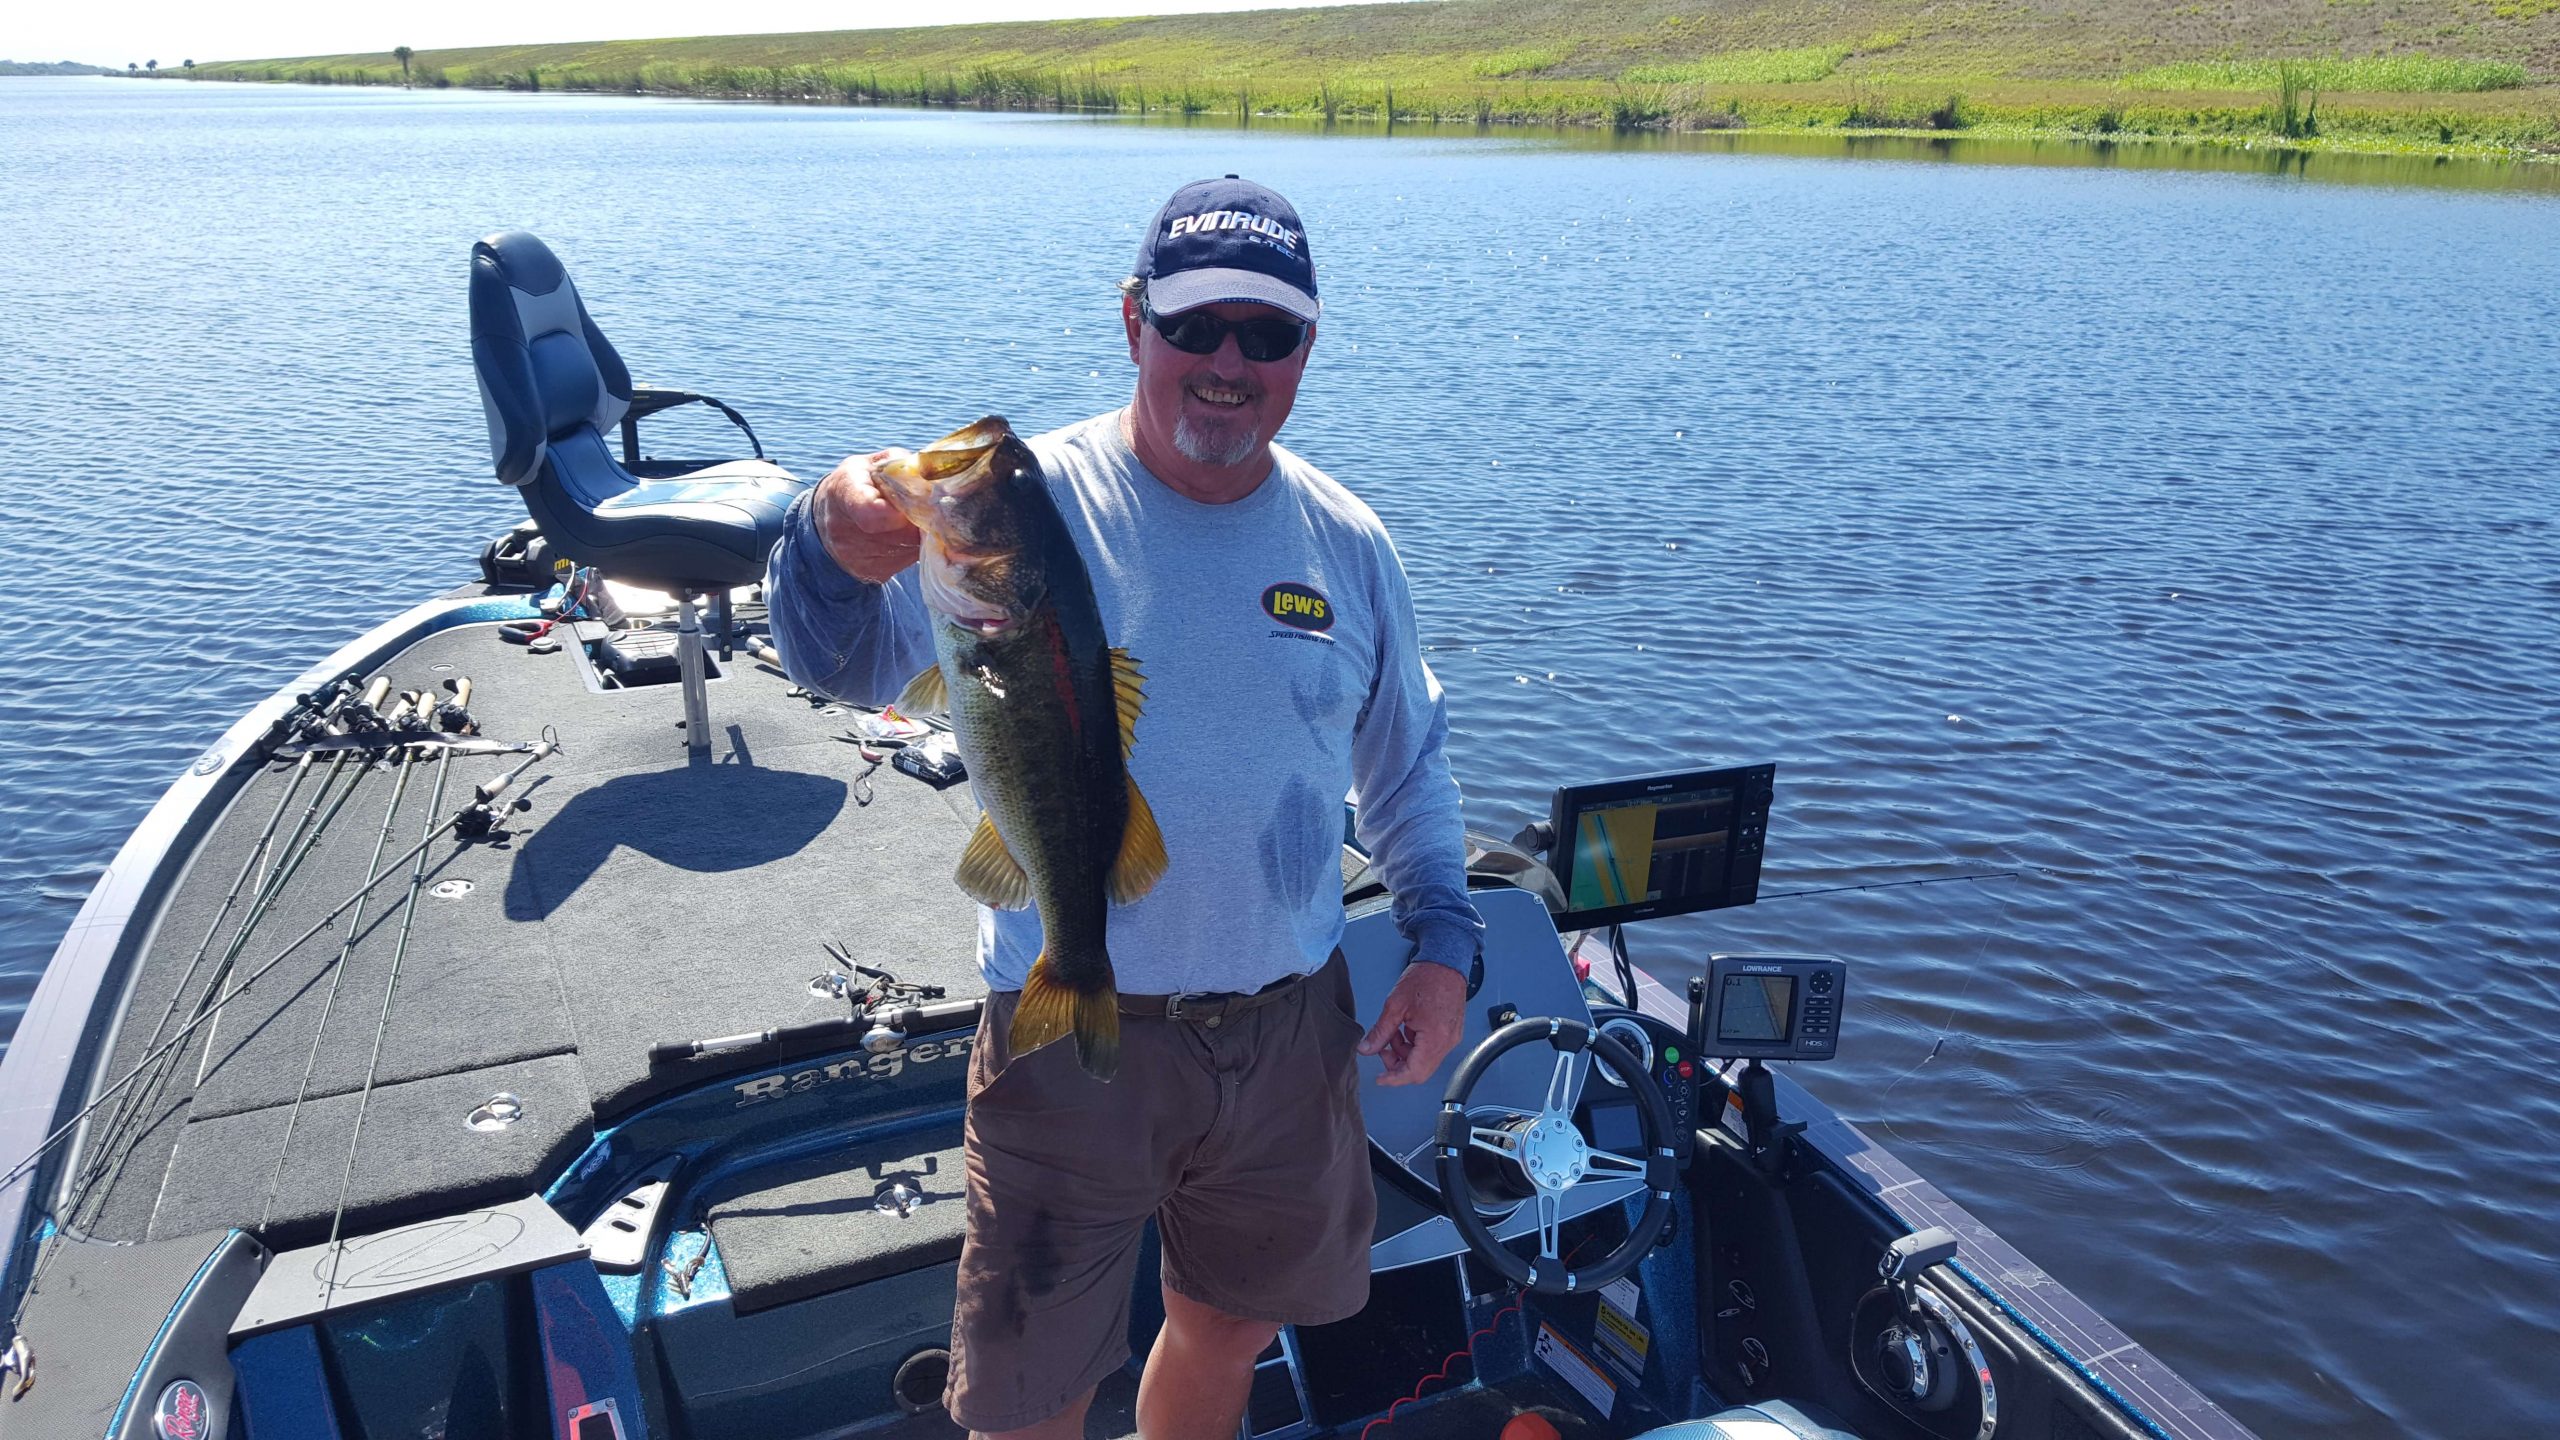 The sun is making things hot and so is the fishing for David Fritts. He has put a flurry of bites together and has just made another cull with this 4-pounder.